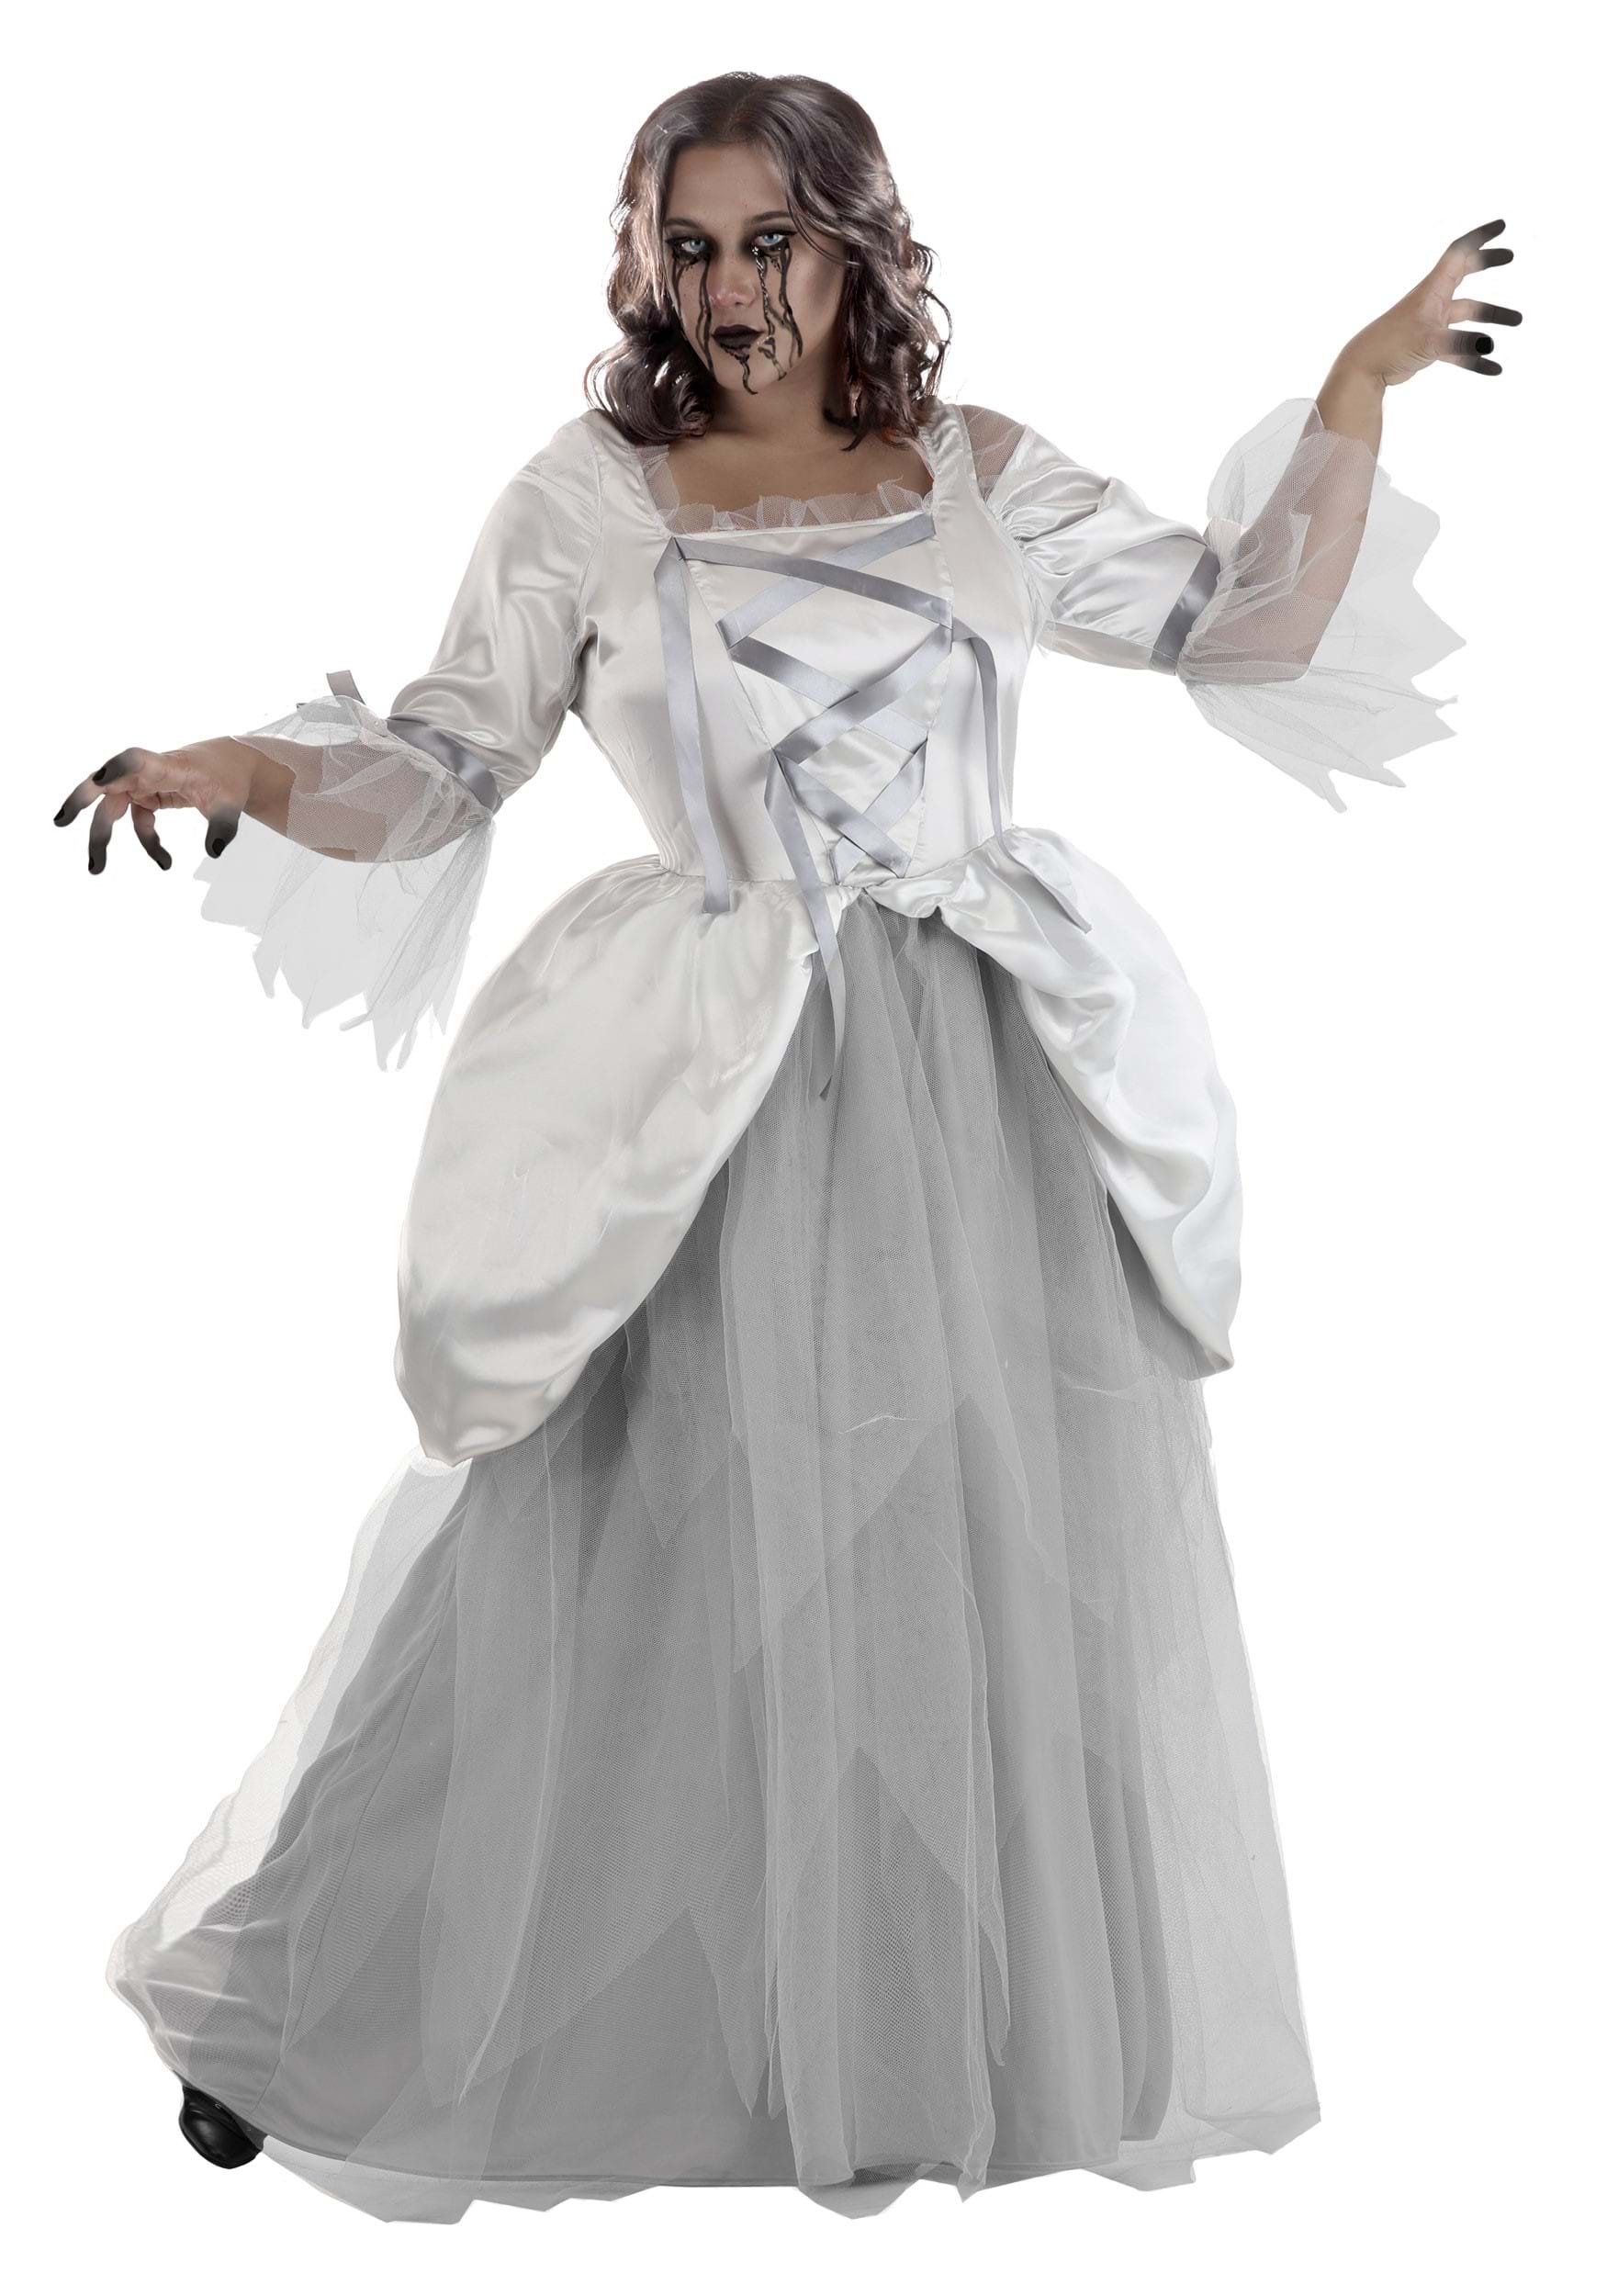 https://images.halloweencostumes.com/products/45053/1-1/womens-plus-size-18th-century-ghost-costume.jpg